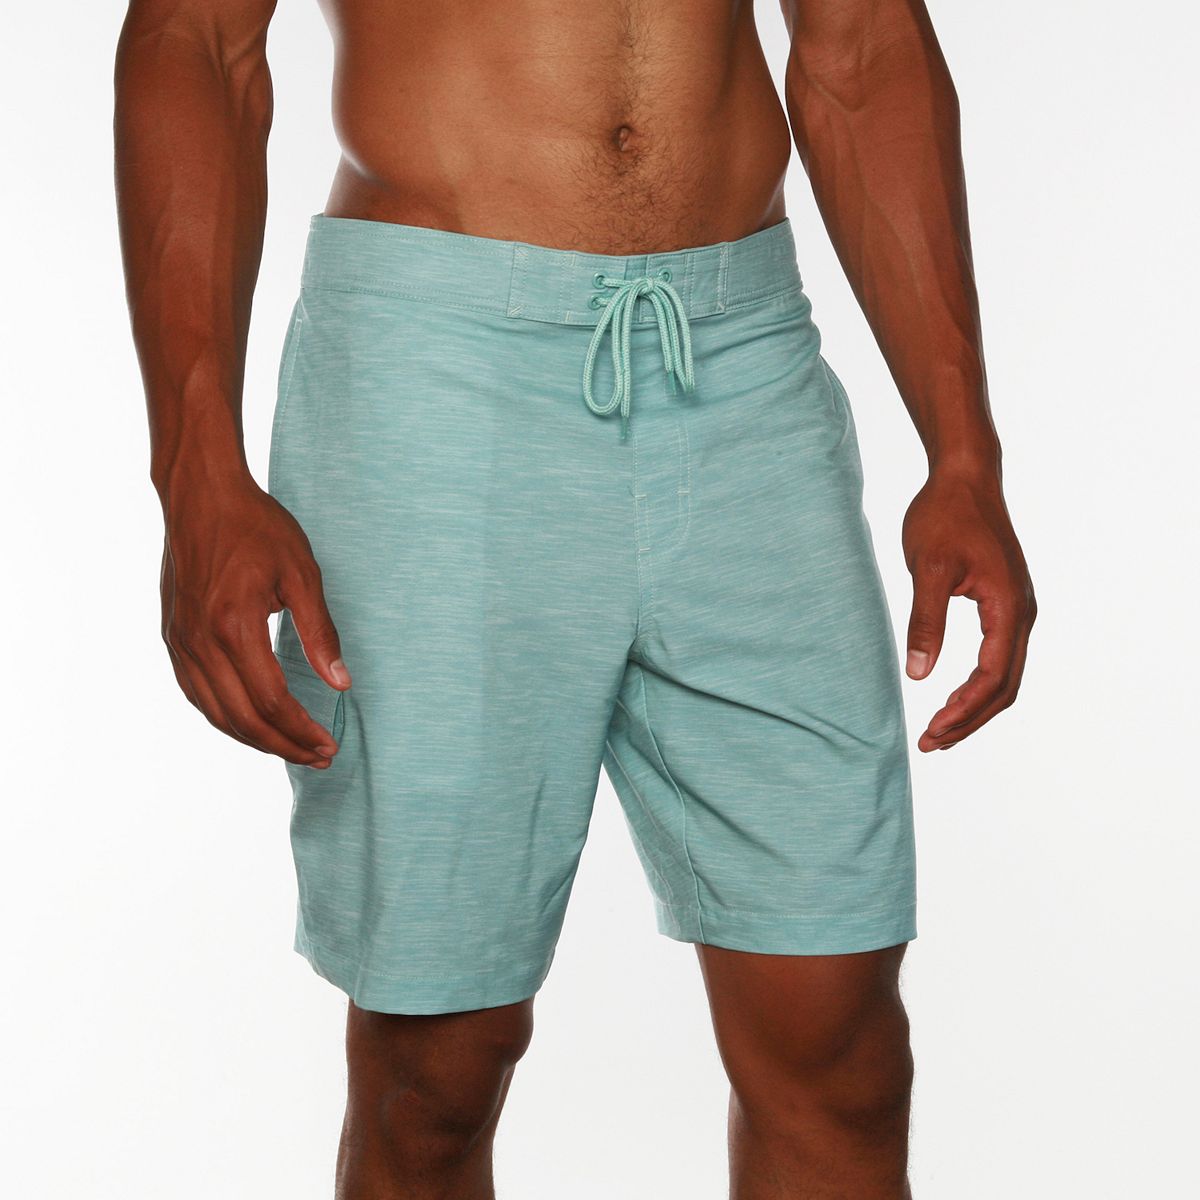 Board Shorts For Men: Hit the Beach In Style With Surfing Shorts For Men |  Kohl's